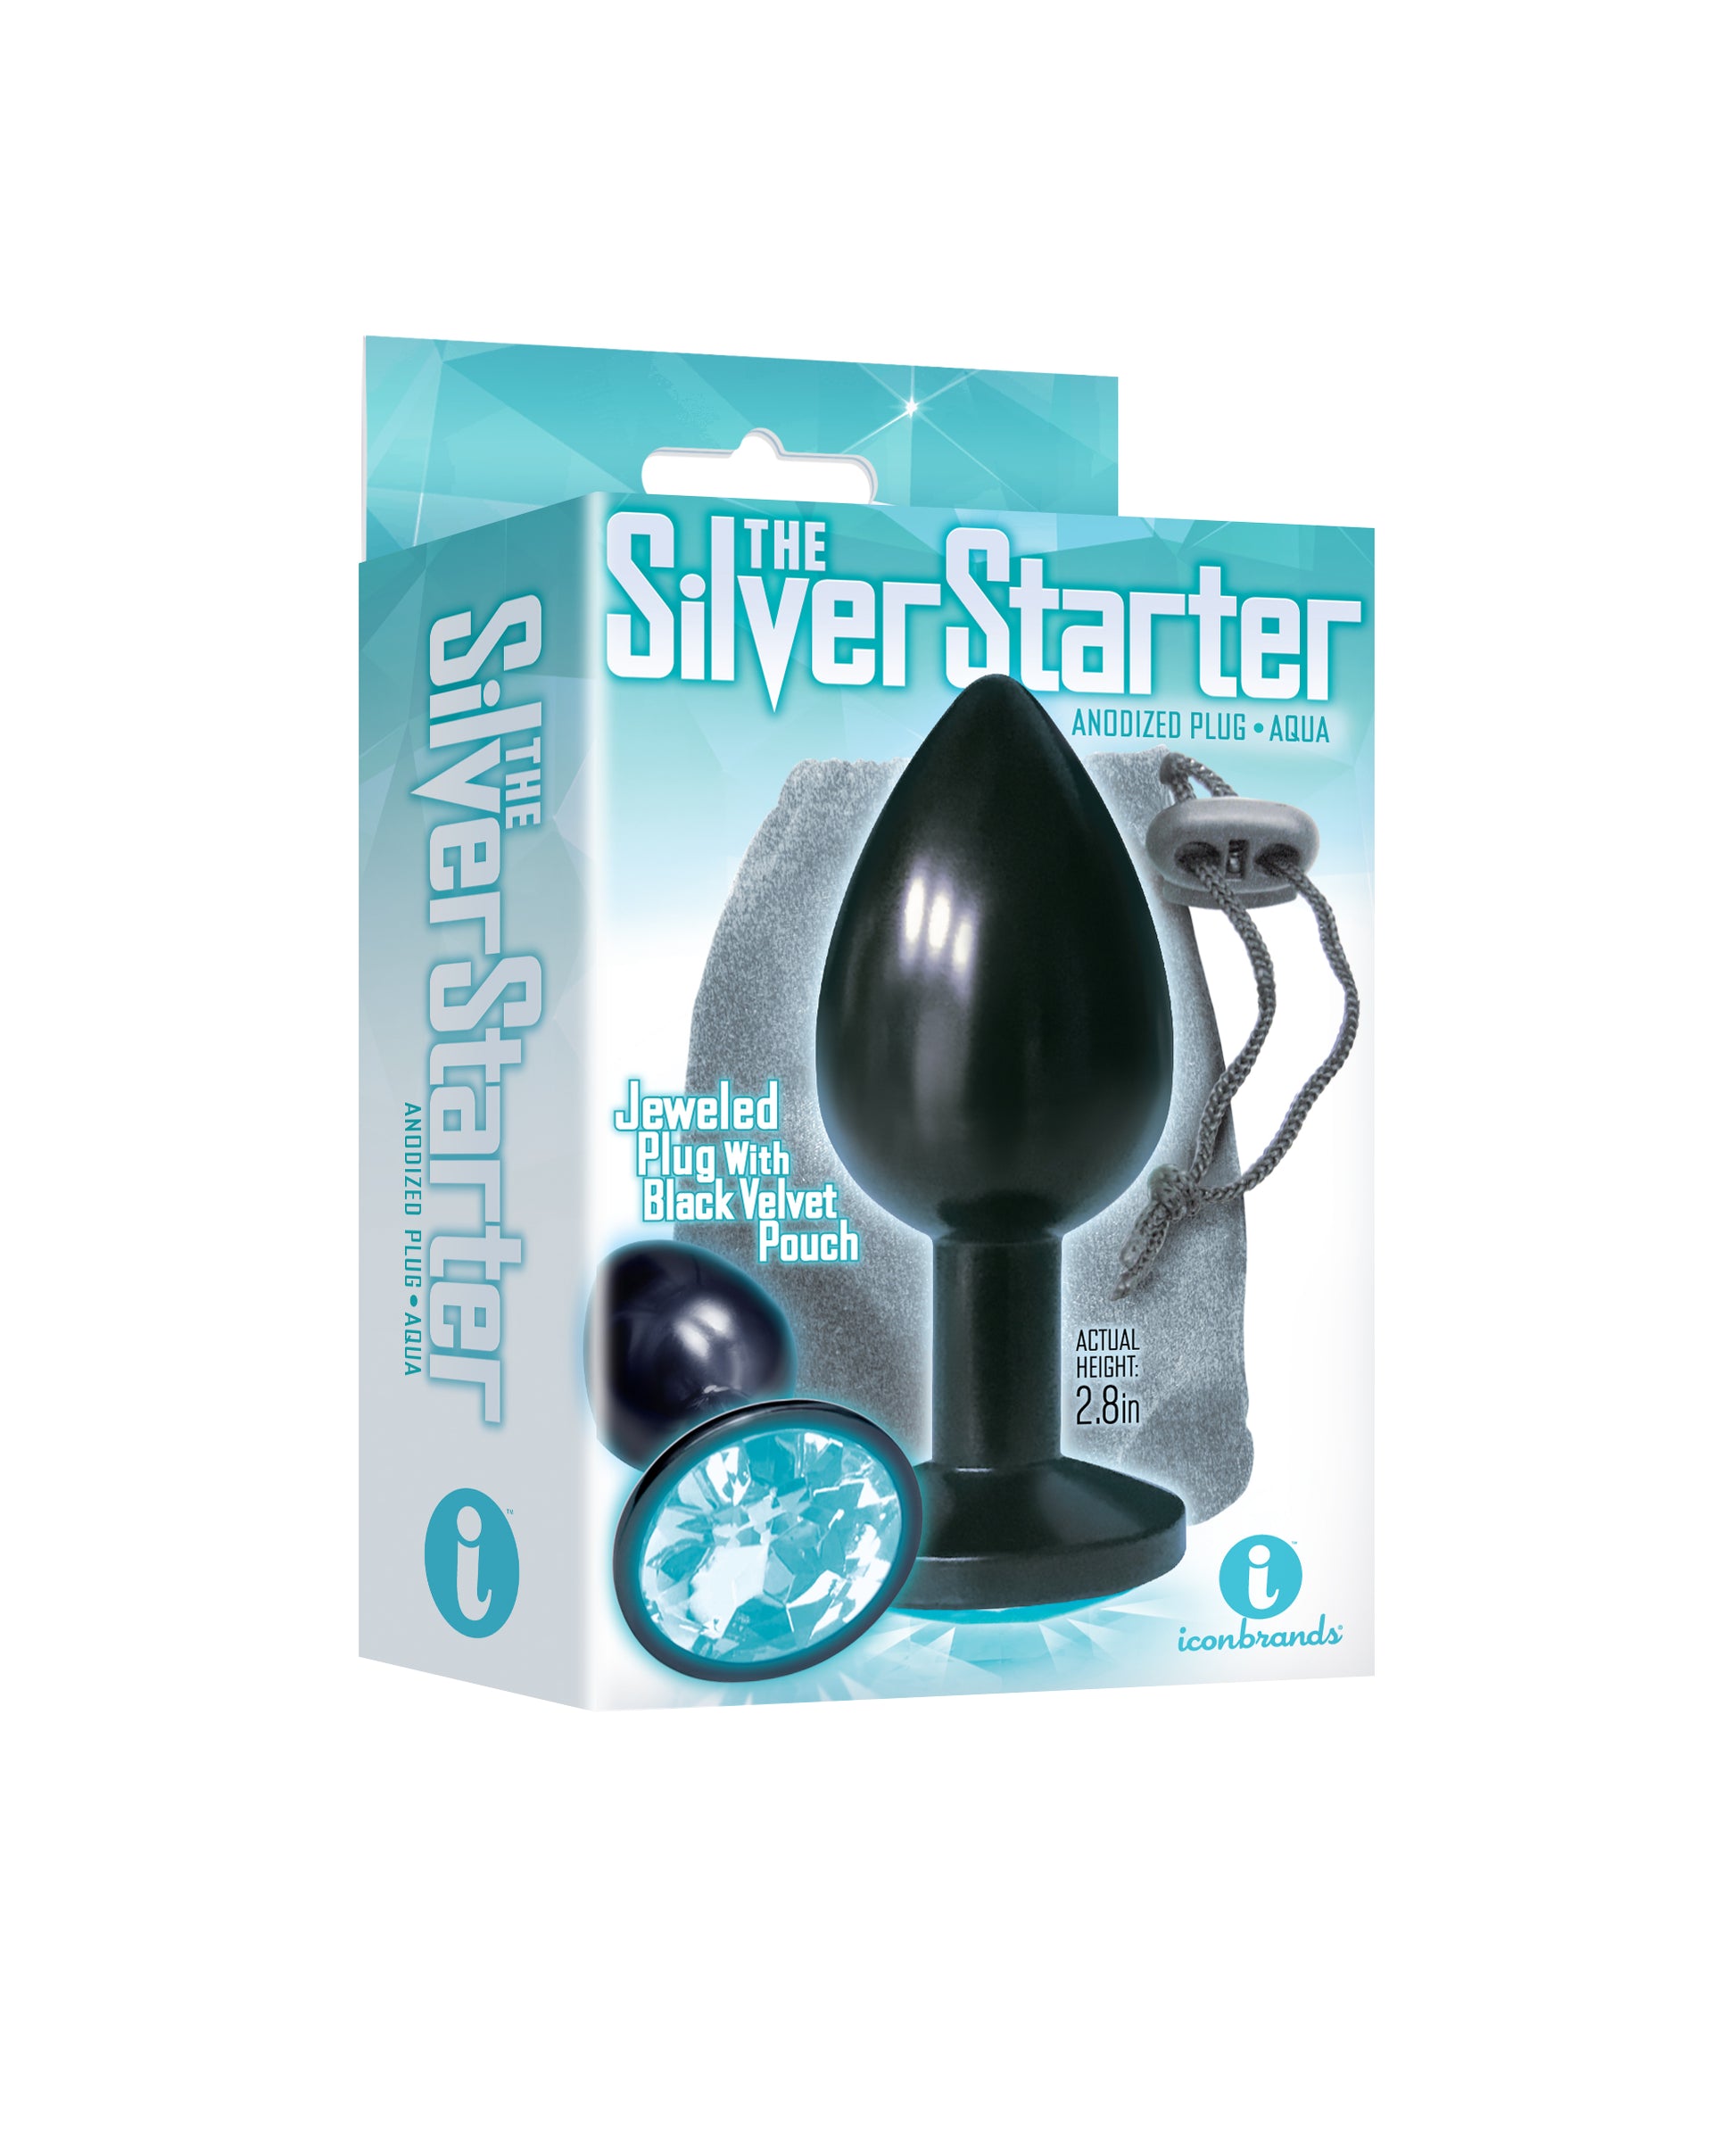 The 9's the Silver Starter Anodized Bejeweled Stainless Steel Plug - Aqua ICB2614-2